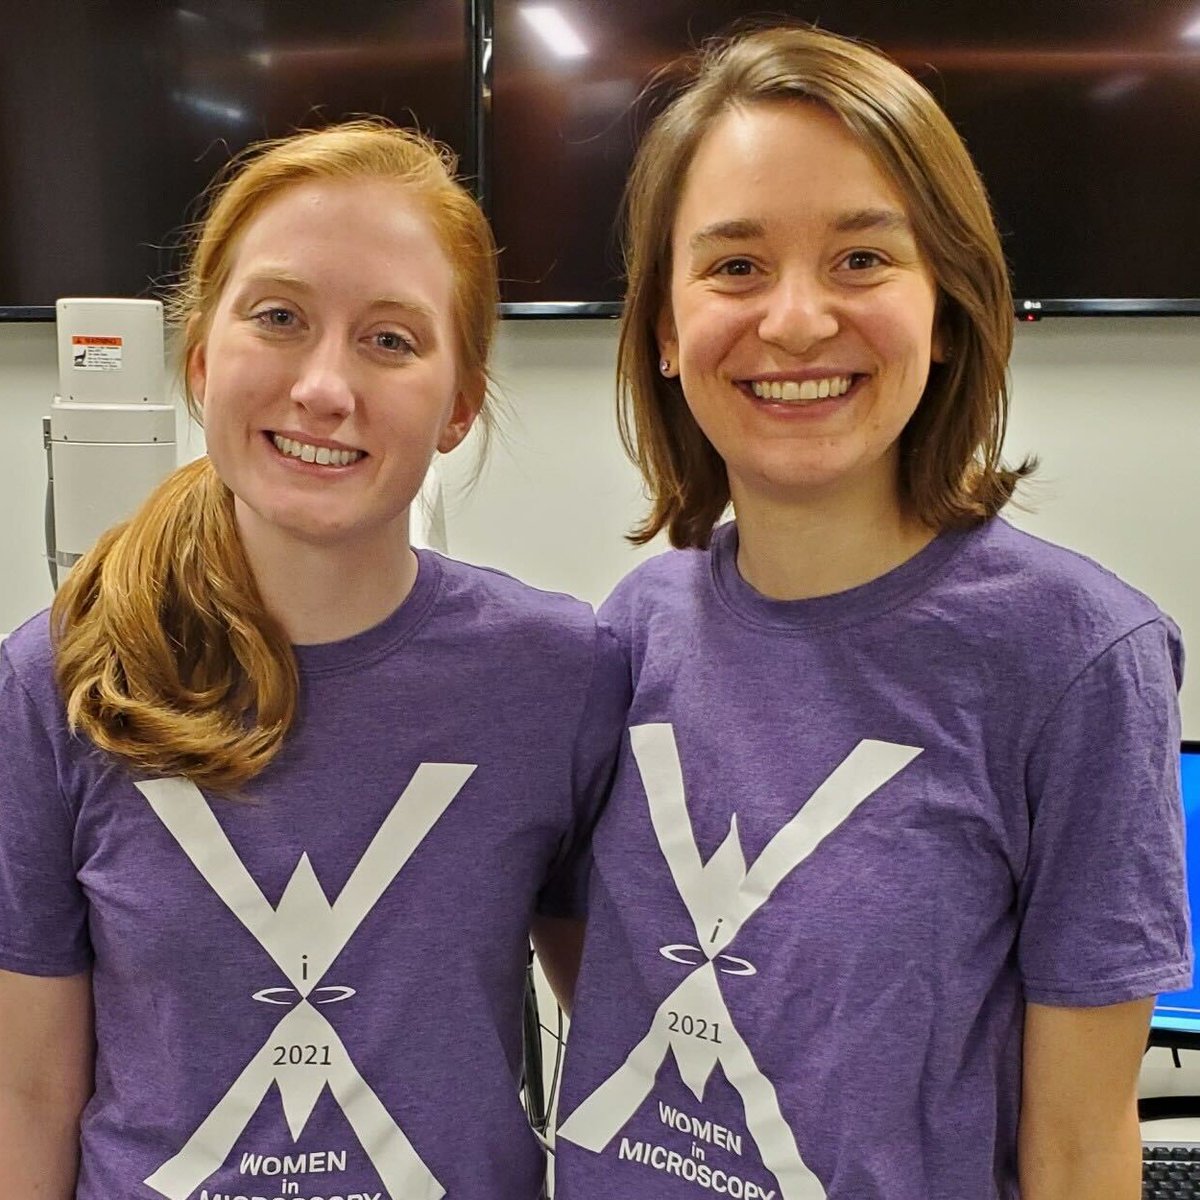 Tirzah is an advocate! Through @nuancecenter & @MicroscopySoc student council, Tirzah & @StephanieRibetfounded the annual Women in Microscopy Conference: a one-day virtual conference highlighting women who are impacting the field of microscopy. #WomenInSTEM